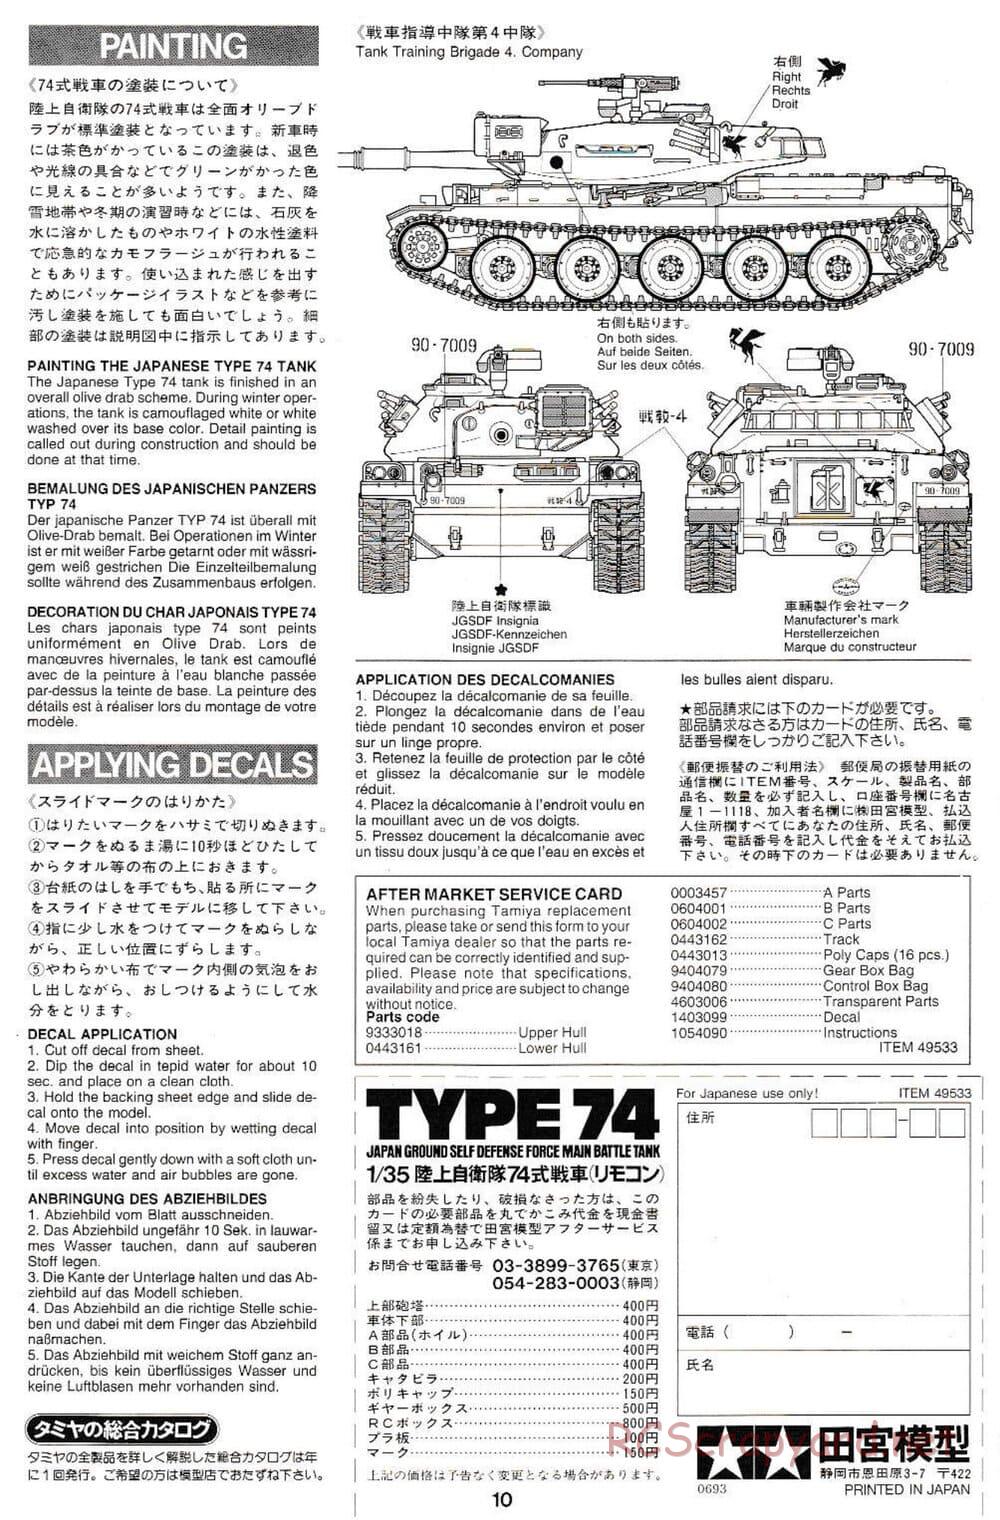 Tamiya - J.G.S.D.F. Type 74 - 1/35 Scale Chassis - Manual - Page 10